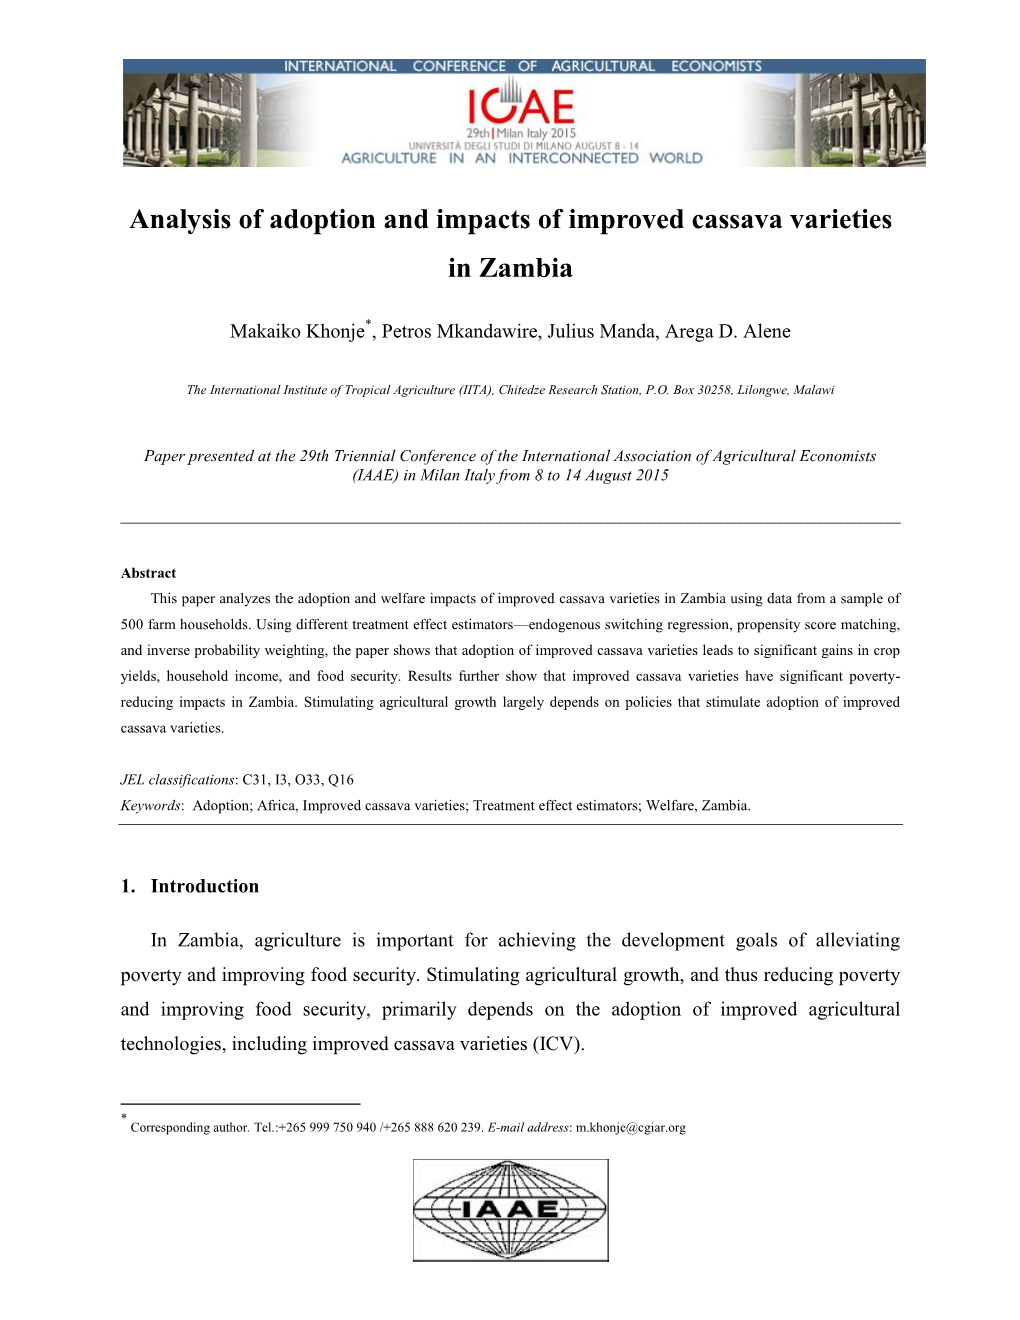 Analysis of Adoption and Impacts of Improved Cassava Varieties in Zambia